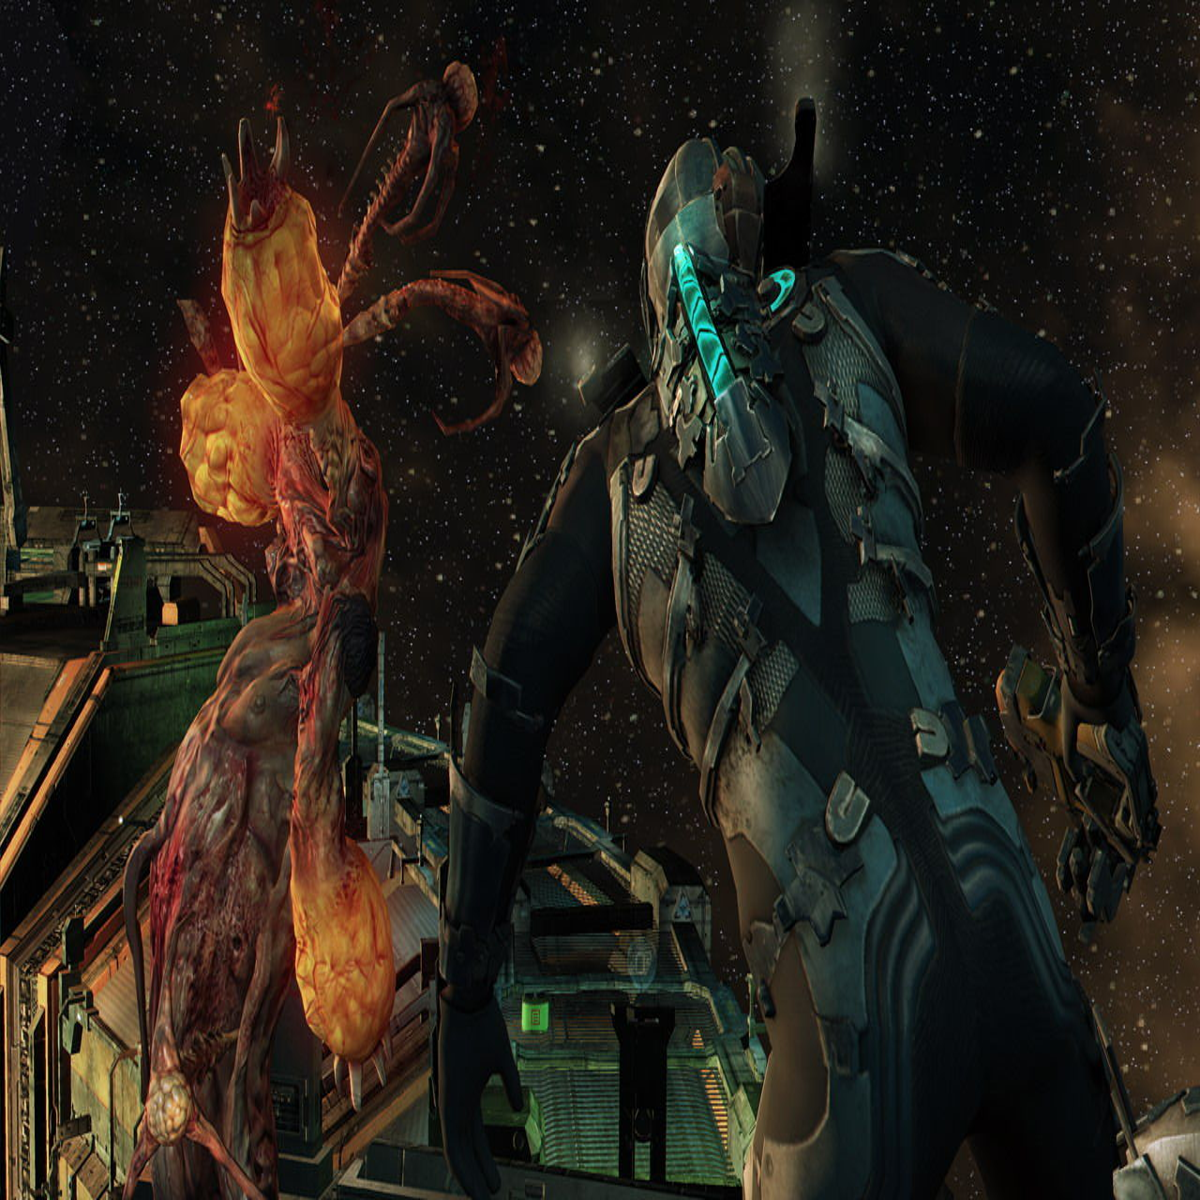  Dead Space 2, Collector's Edition : Video Games